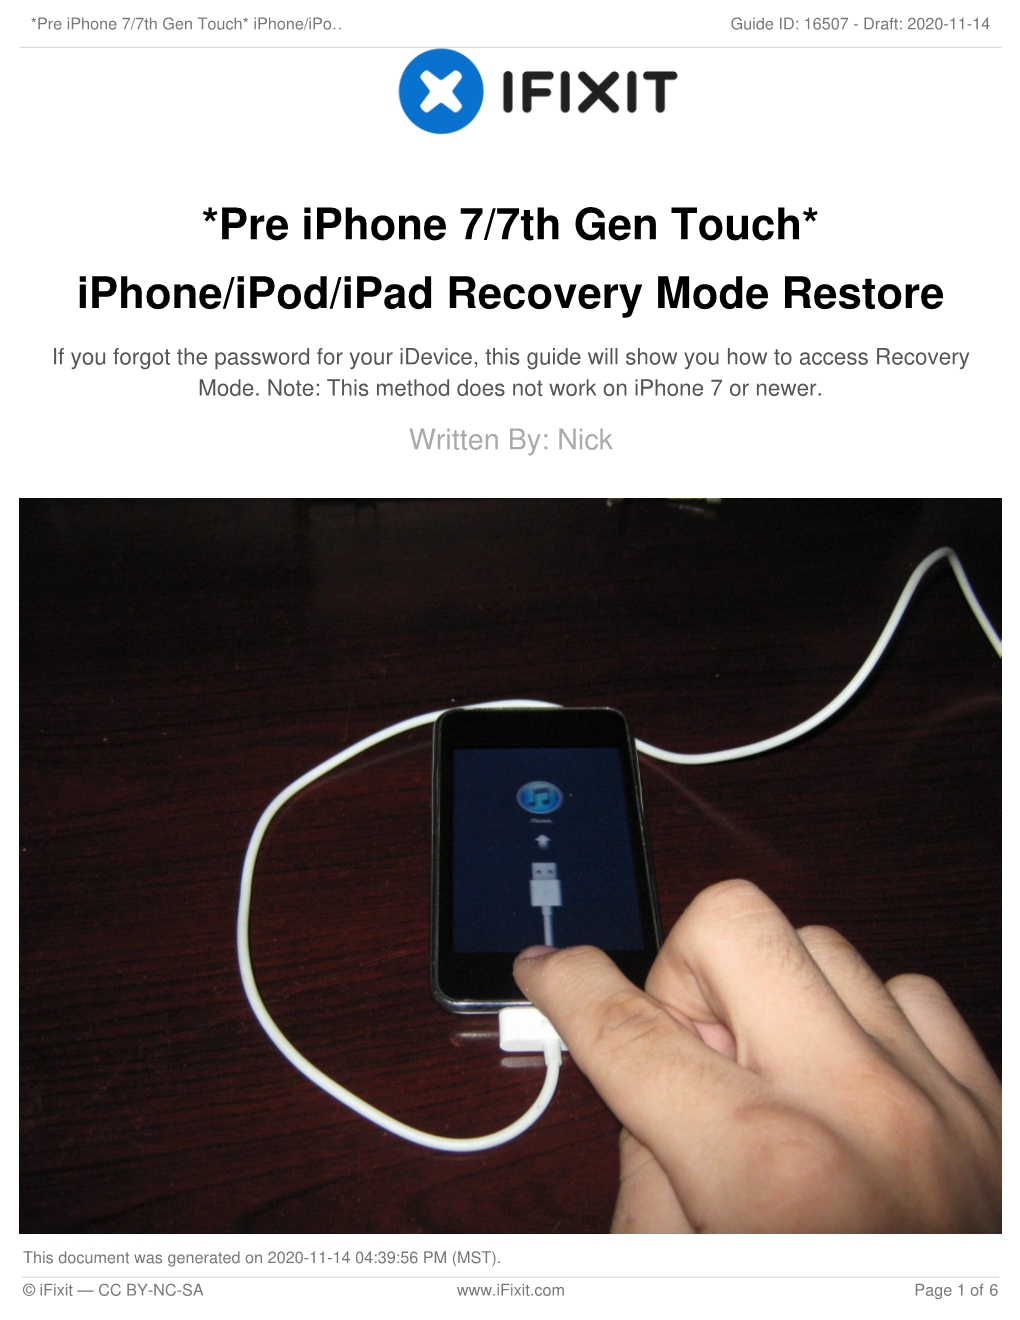 Pre Iphone 7/7Th Gen Touch* Iphone/Ipod/Ipad Recovery Mode Restore